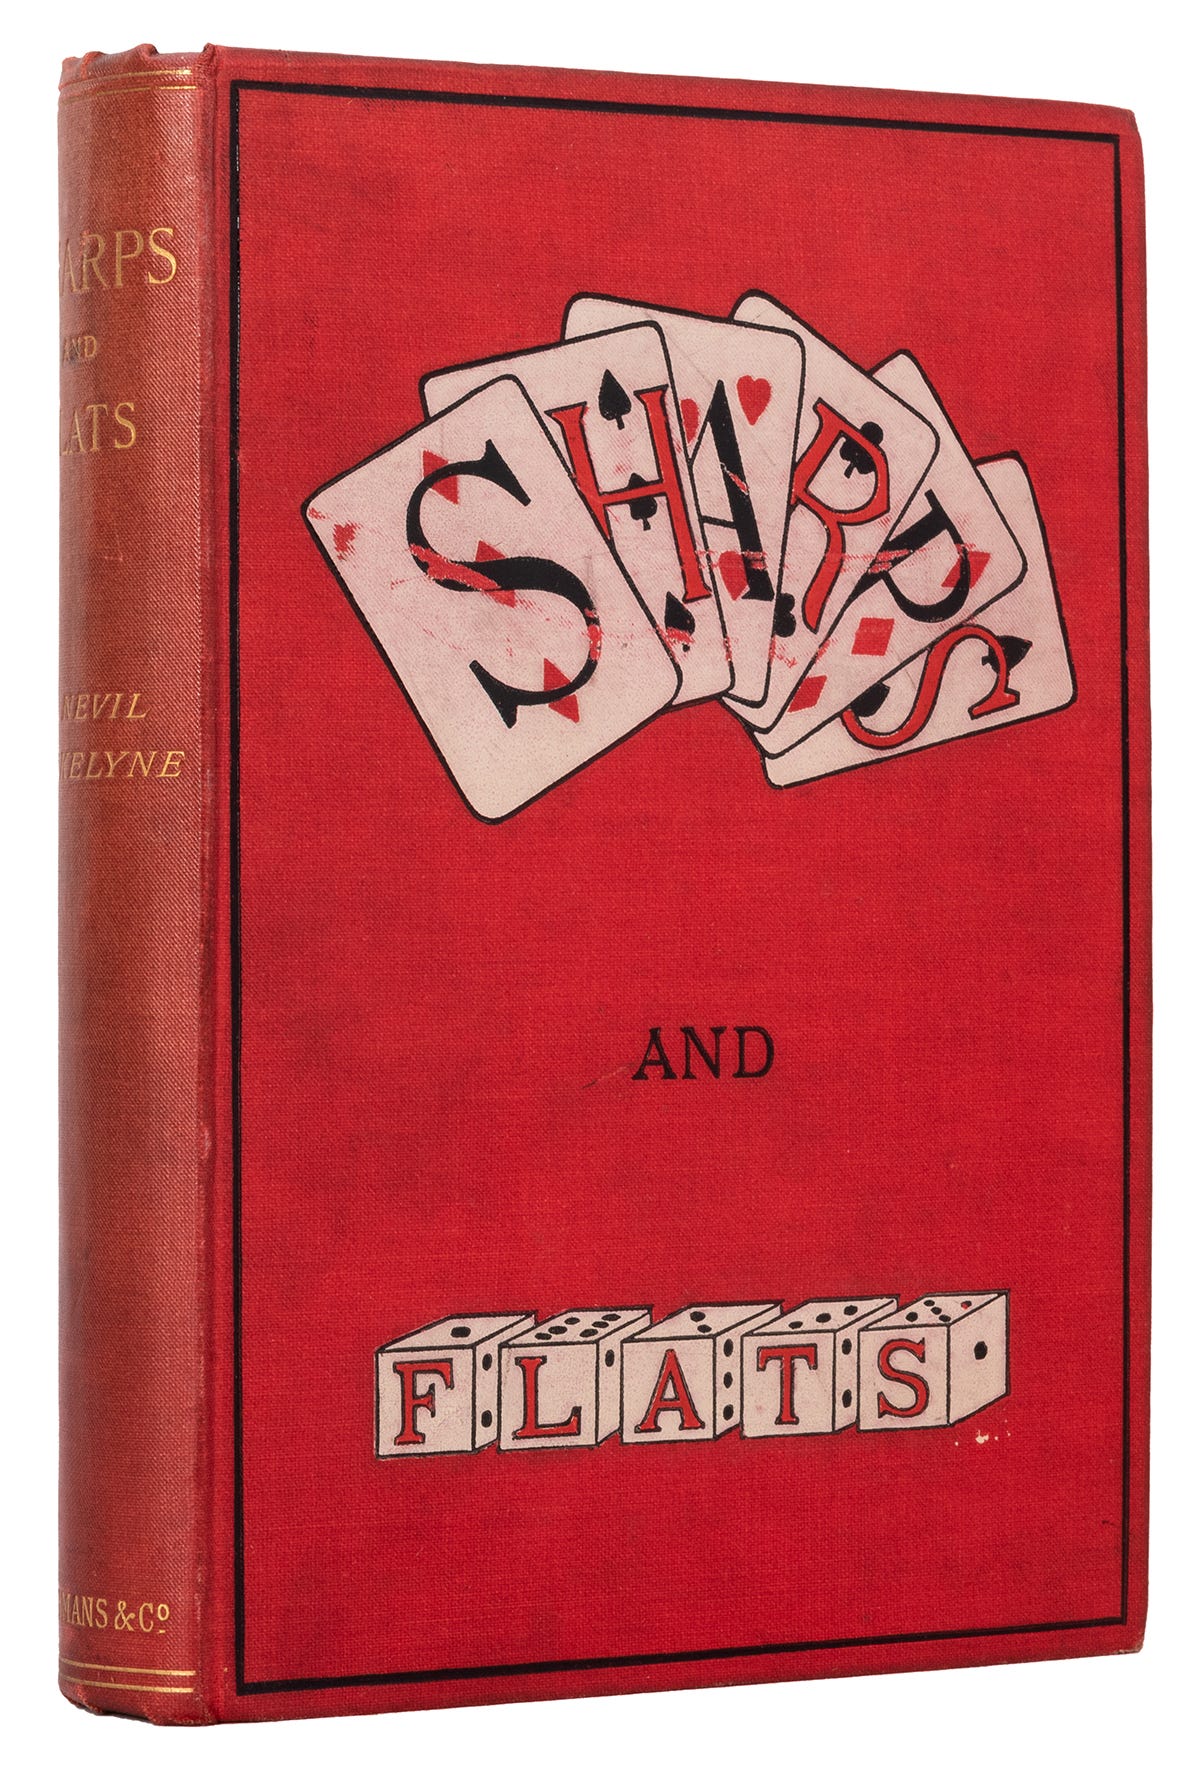 A red hardbacked book with the word "SHARPS" witten on playing cards and the word "FLATS" written on the sides of five dice.